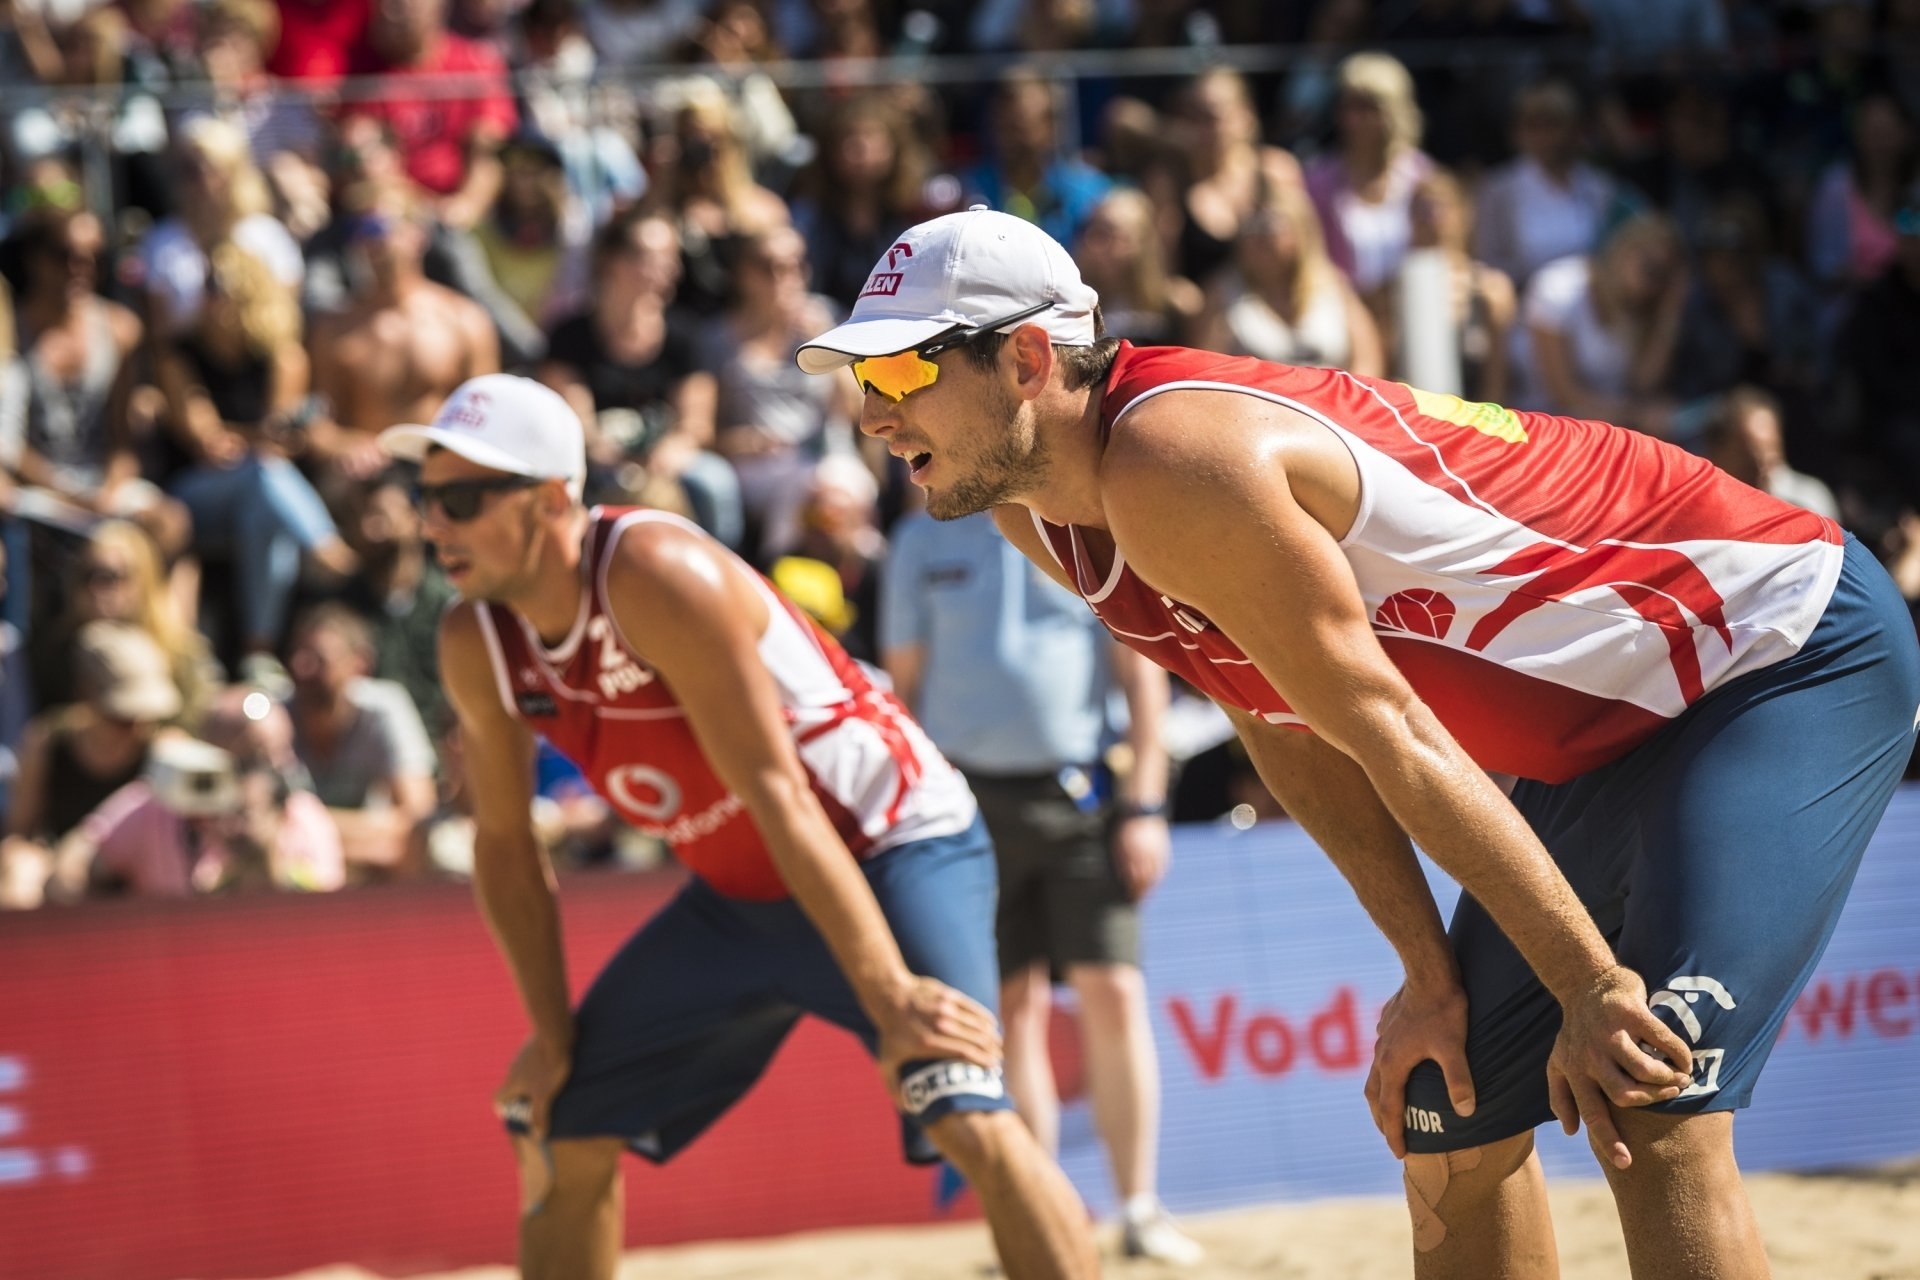 The Polish pair prepare to receive during the World Tour Finals last August